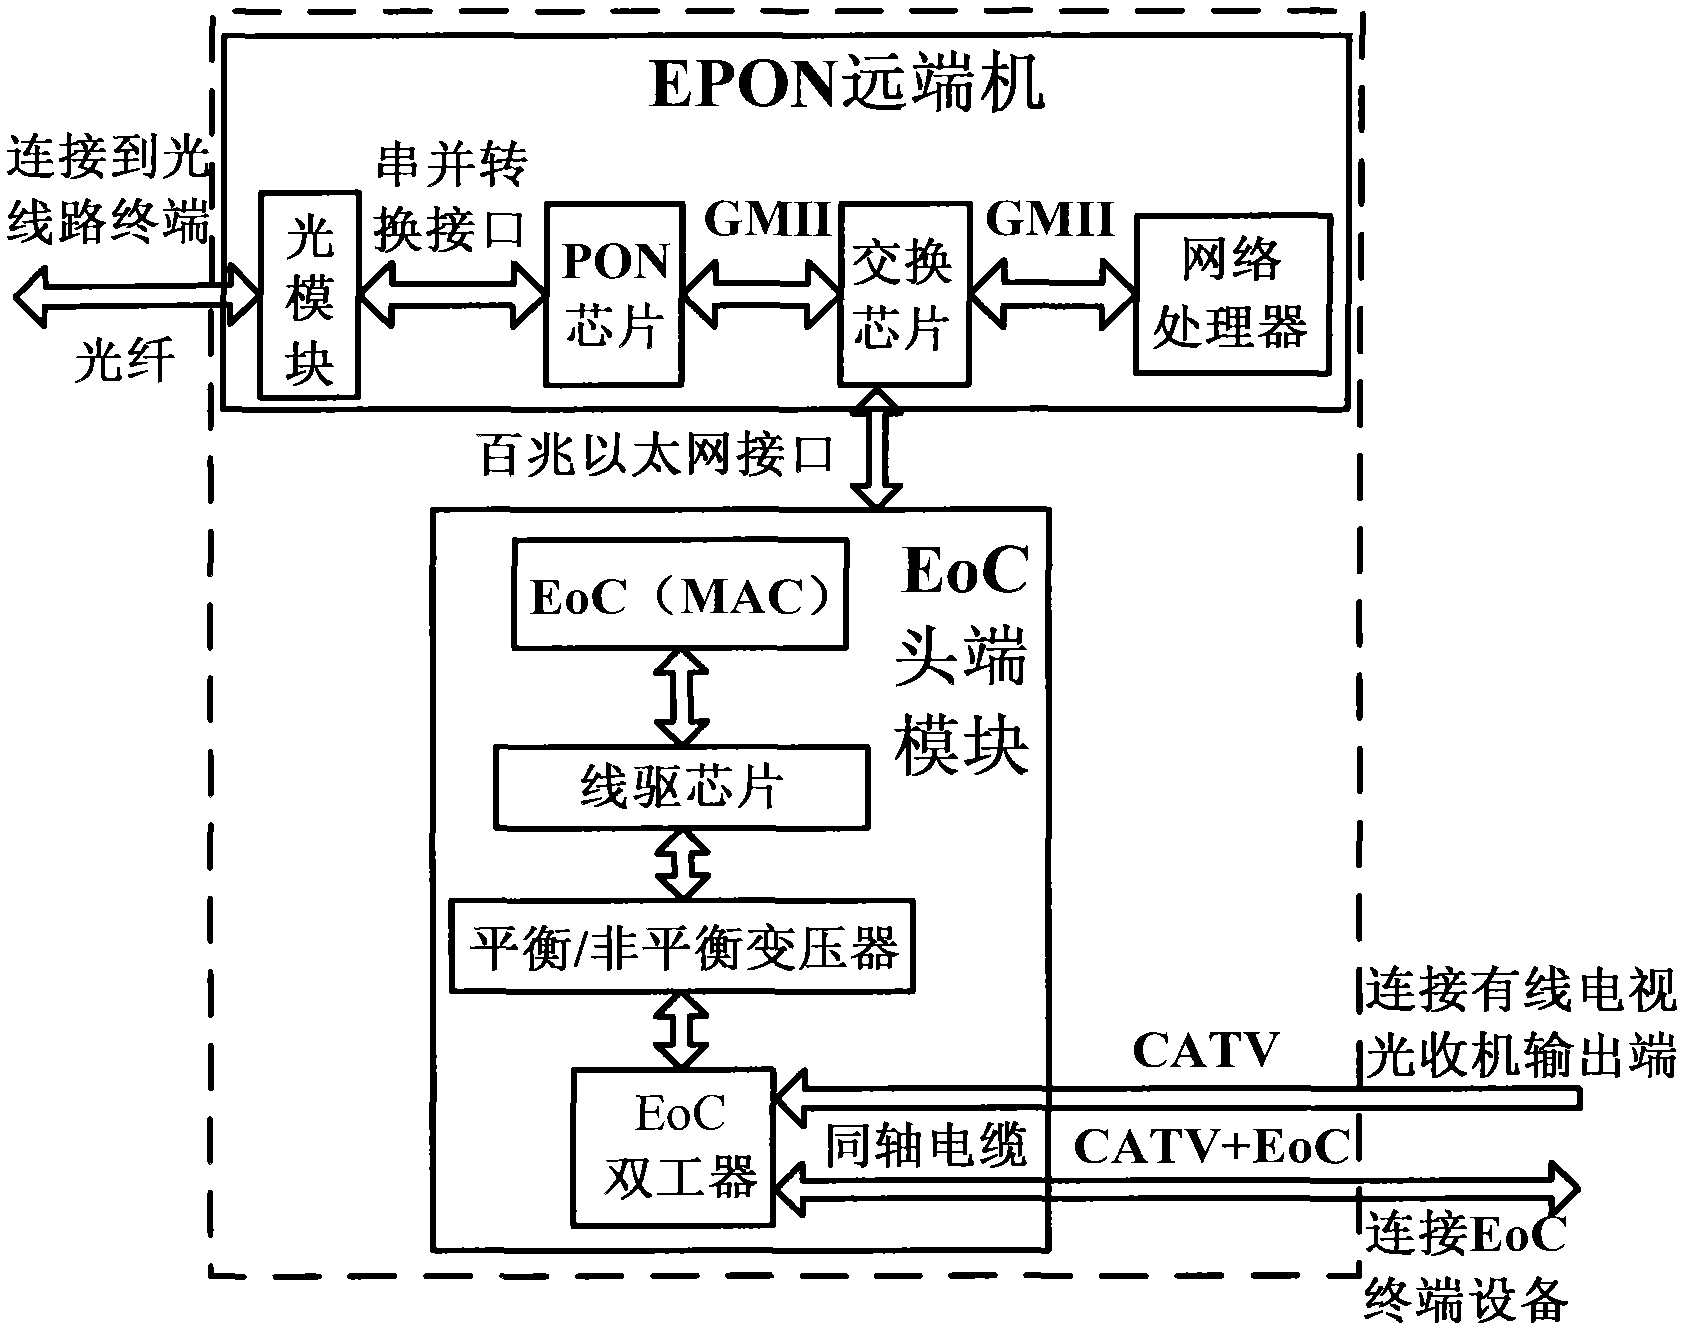 Ethernet passive optical network (EPON) optical network unit fusing Ethernet over coaxial cable (EoC) function